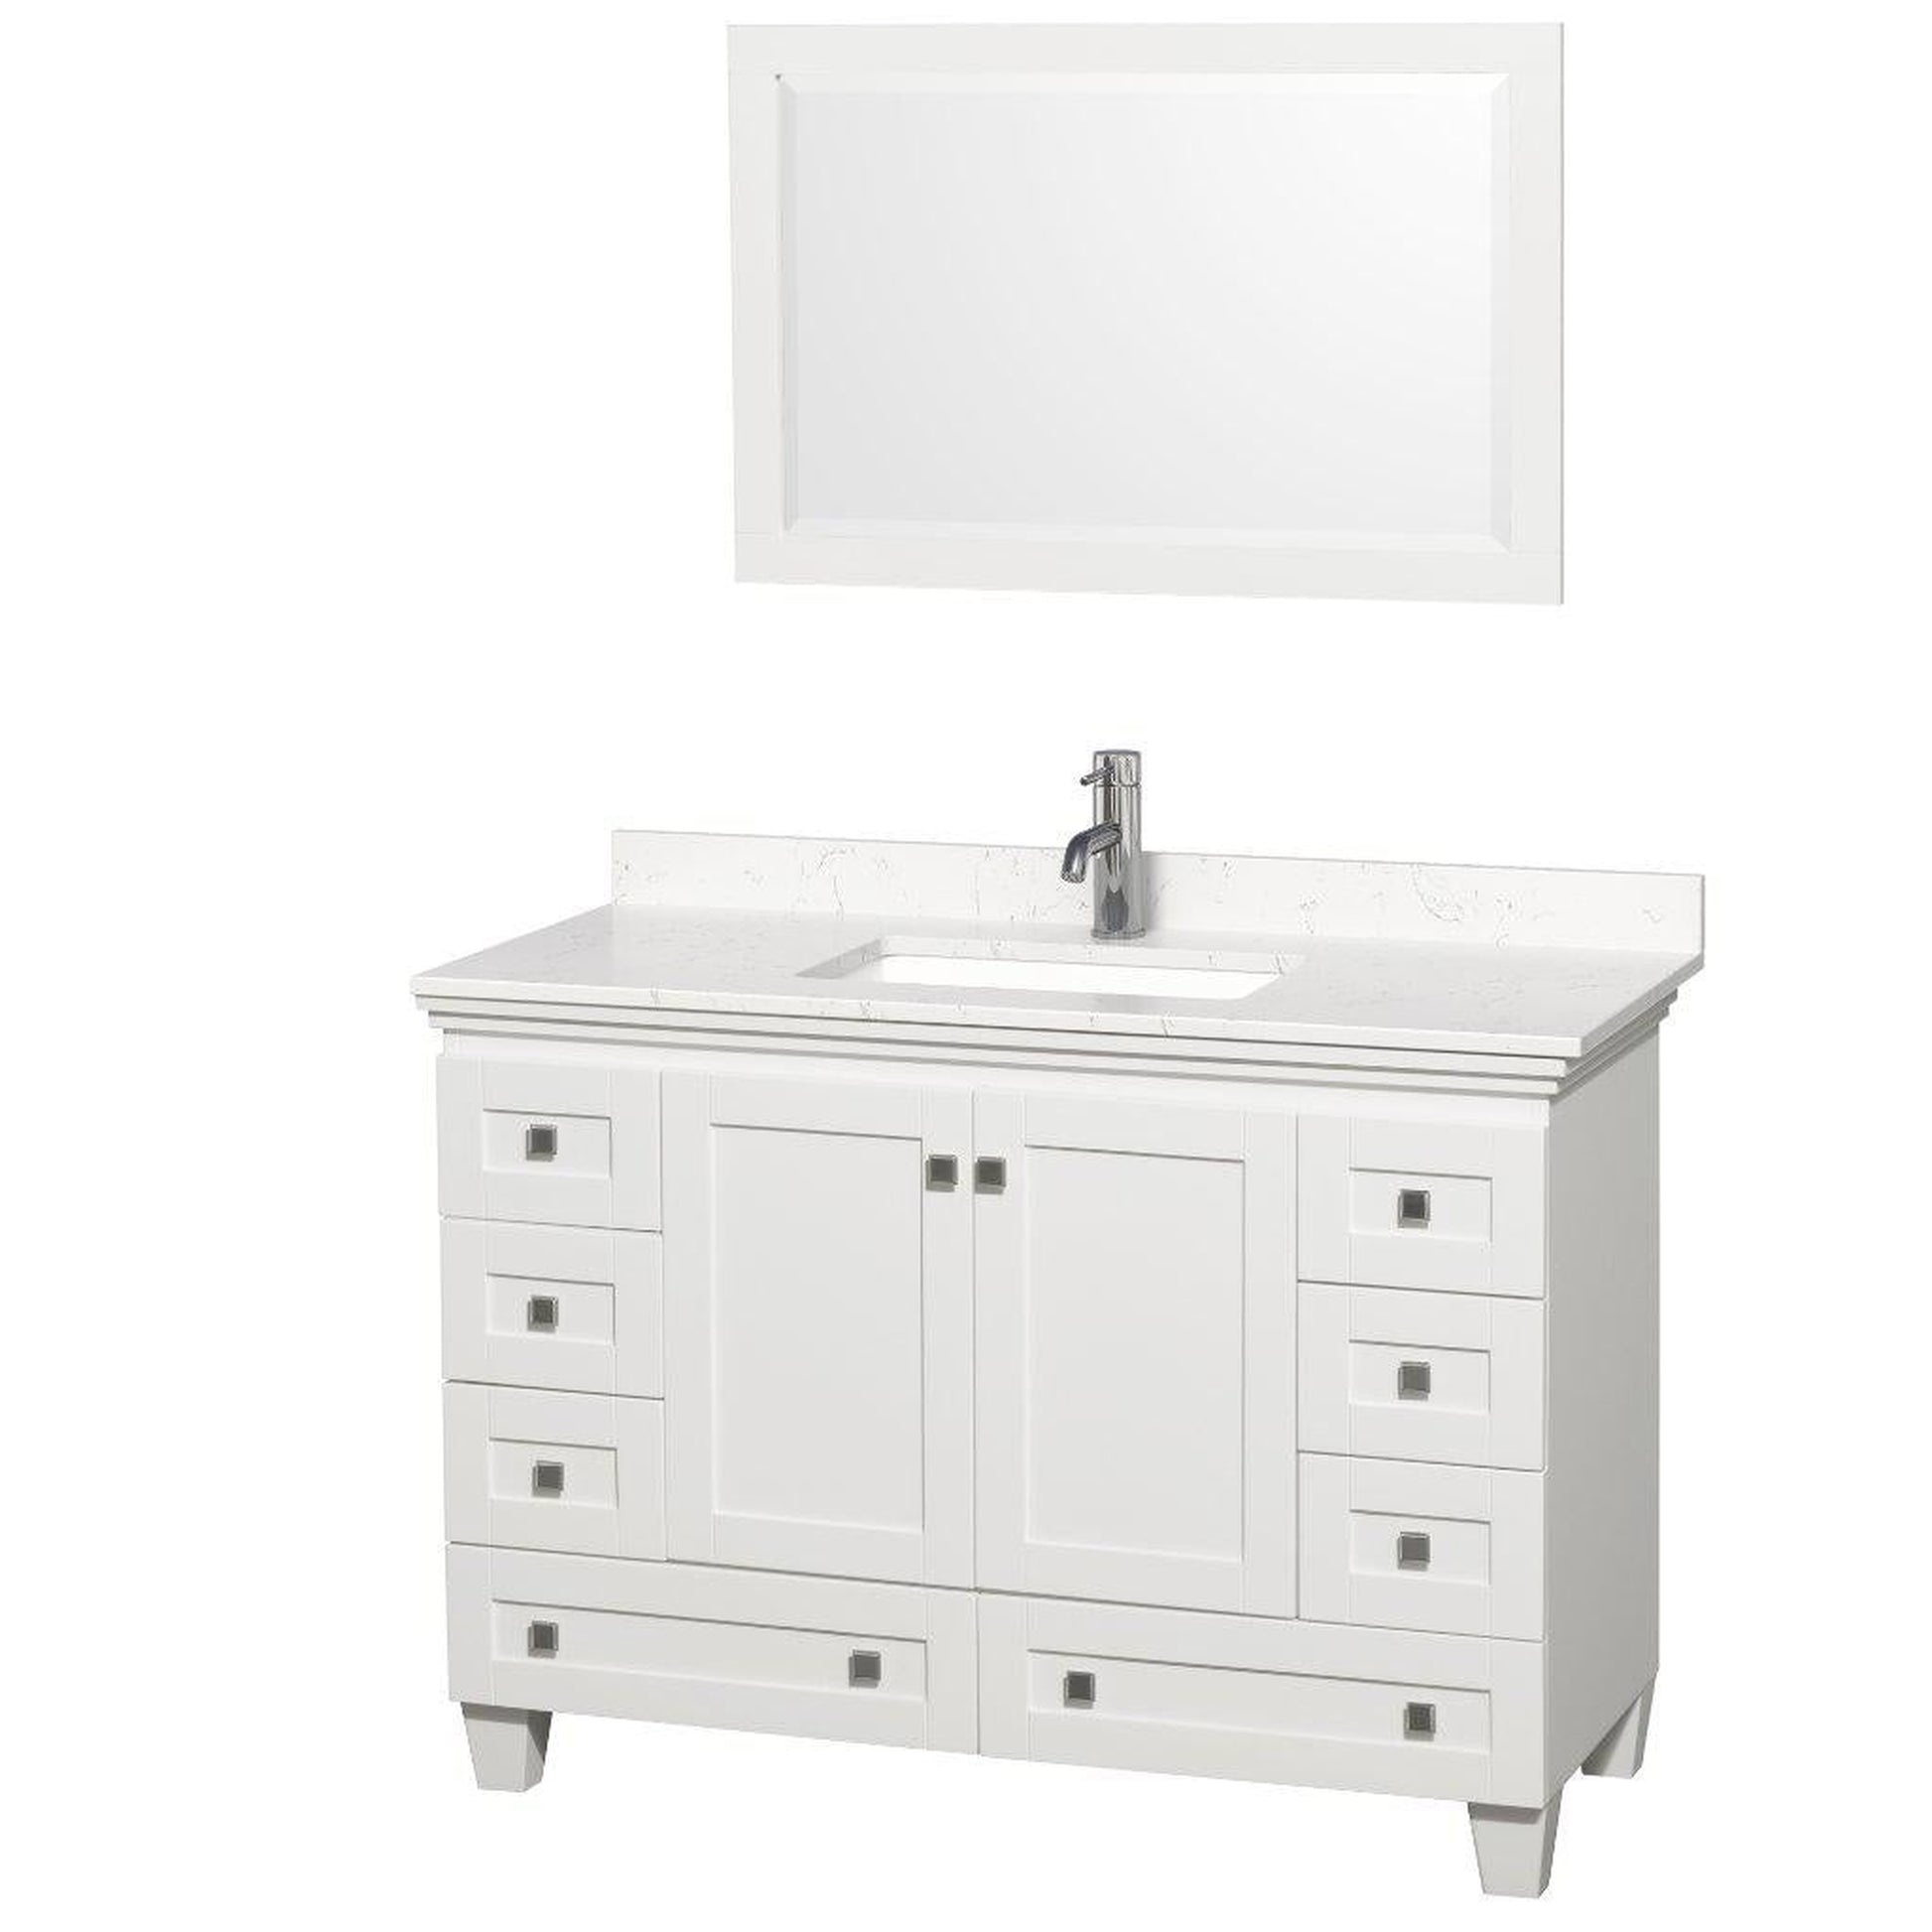 Wyndham Collection Acclaim 48" Single Bathroom White Vanity Set With Light-Vein Carrara Cultured Marble Countertop And Undermount Square Sink And 24" Mirror